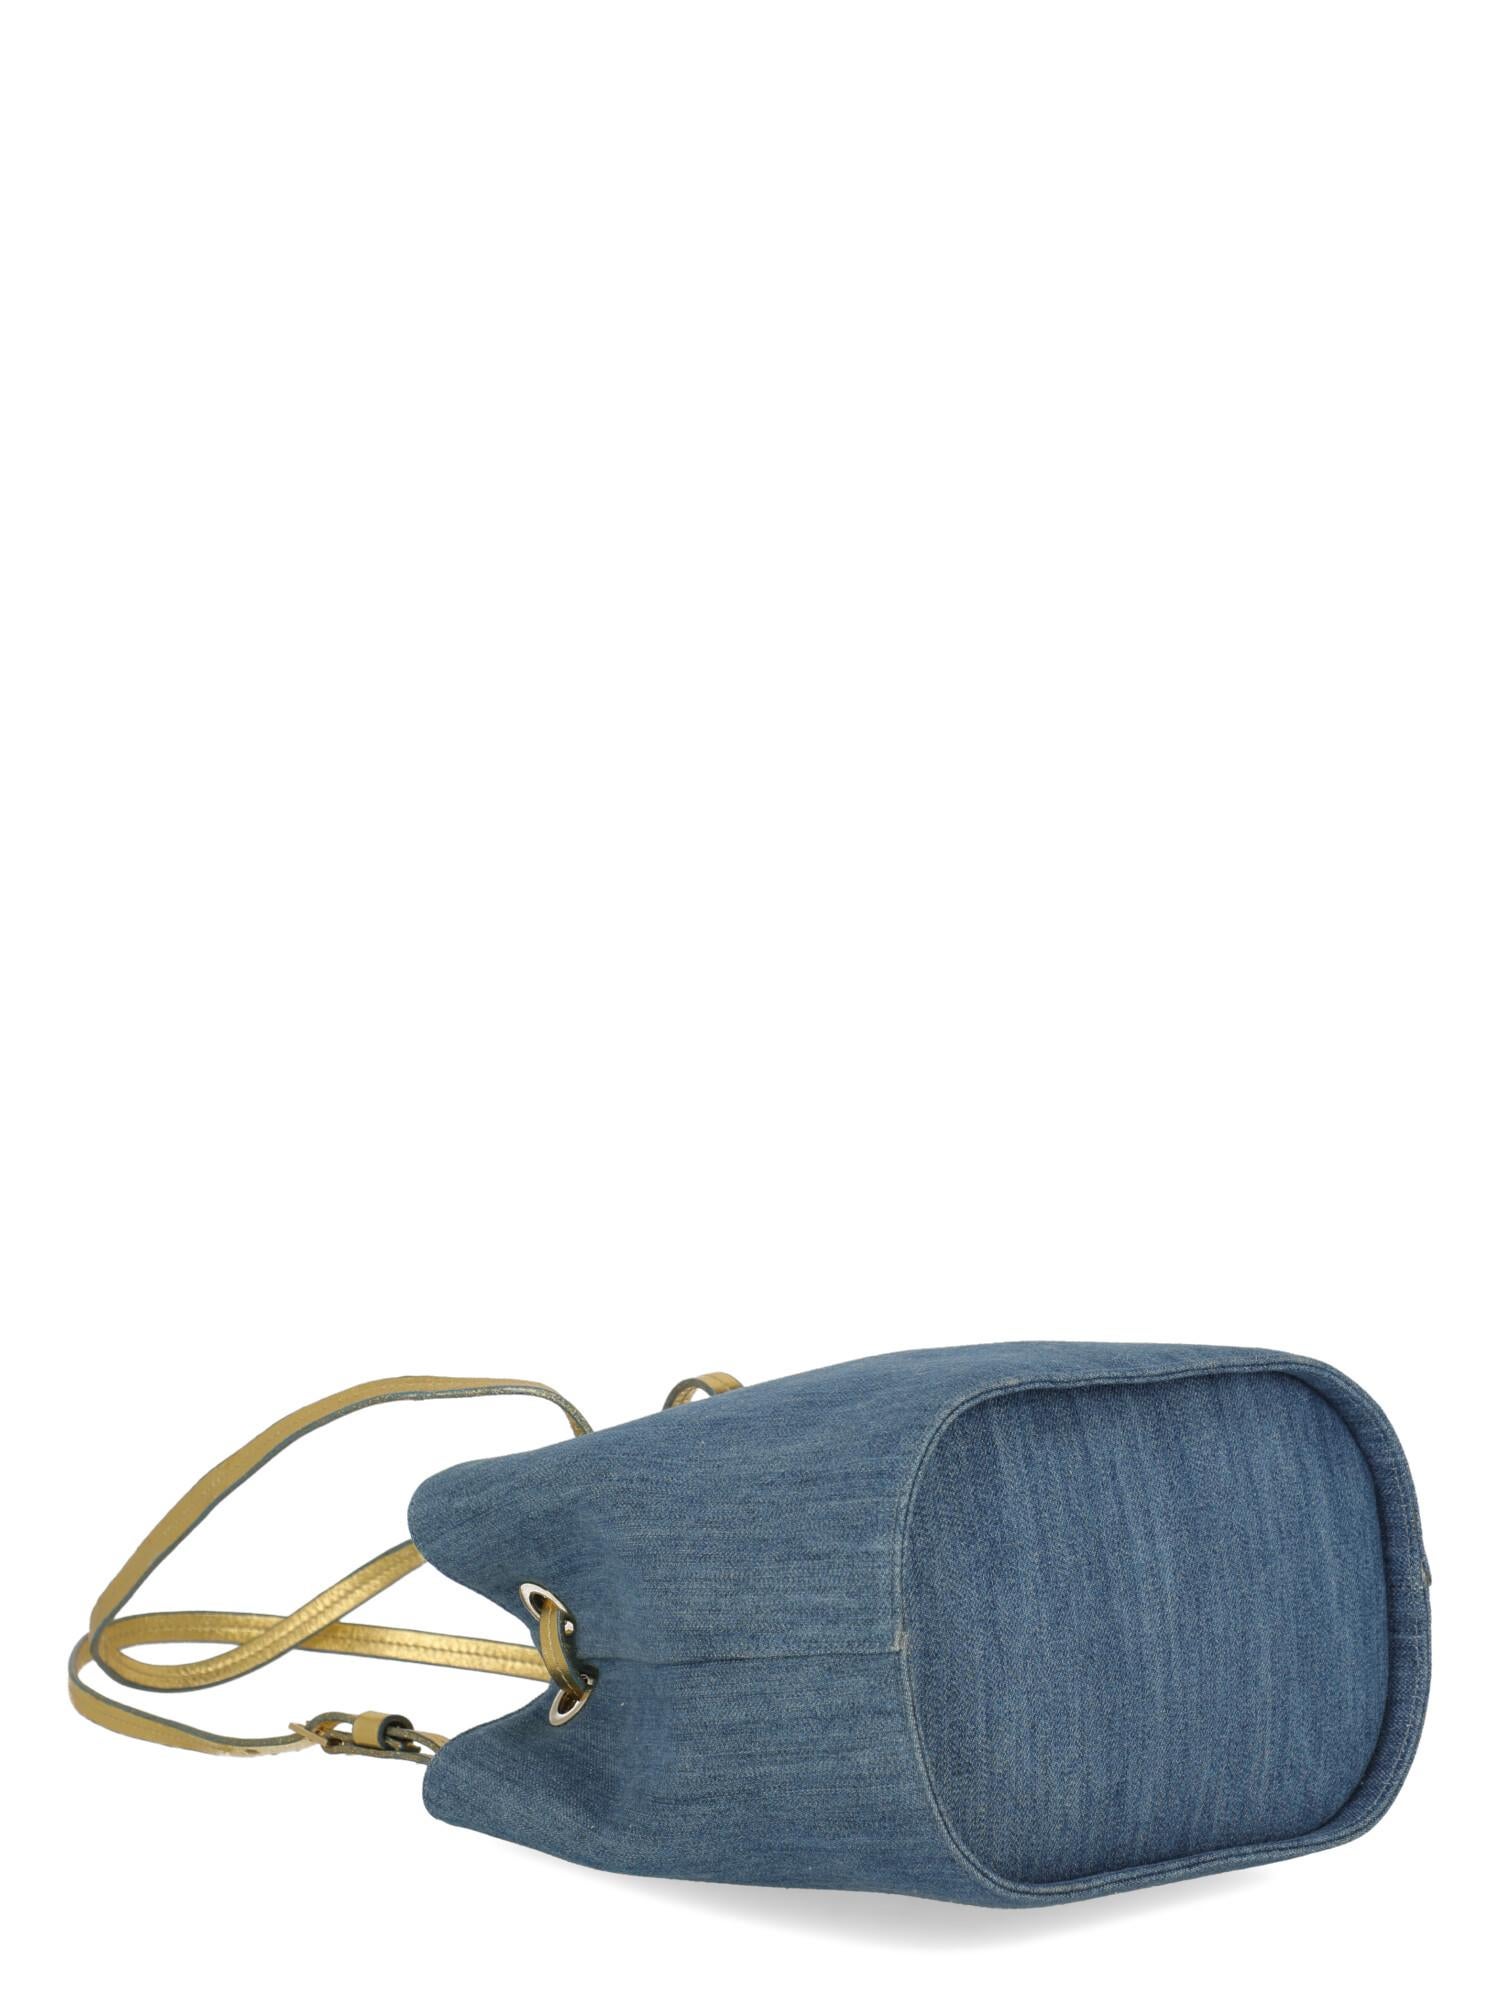 Charlotte Olympia Women Shoulder bags Blue, Gold Cotton  In Excellent Condition For Sale In Milan, IT